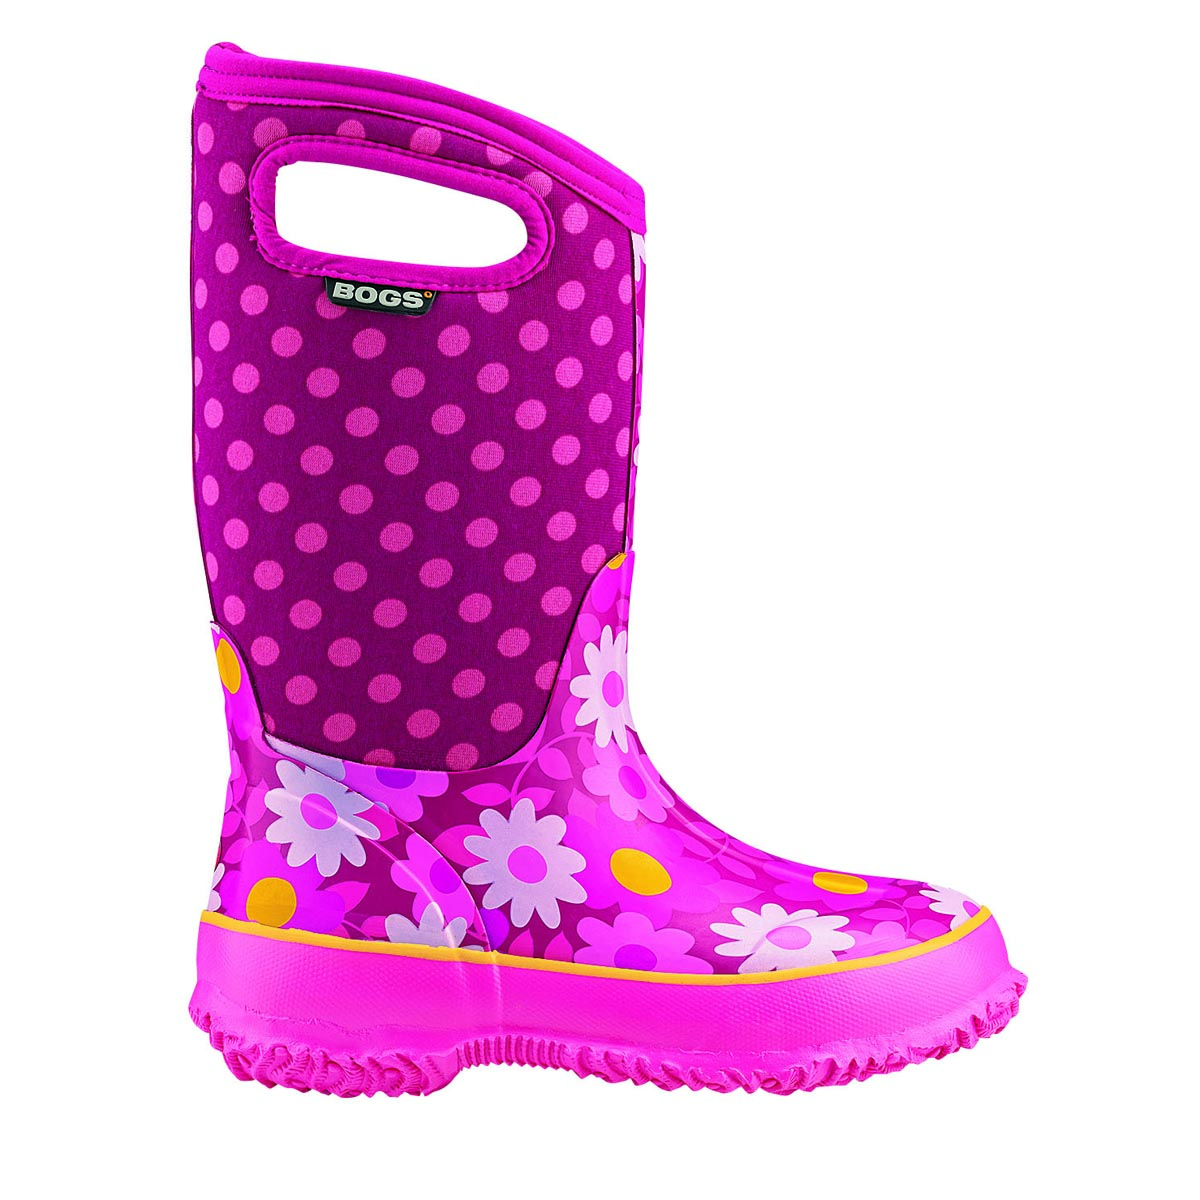 Bogs Youth Girls' Classic Flower Dots Sizes 1 7